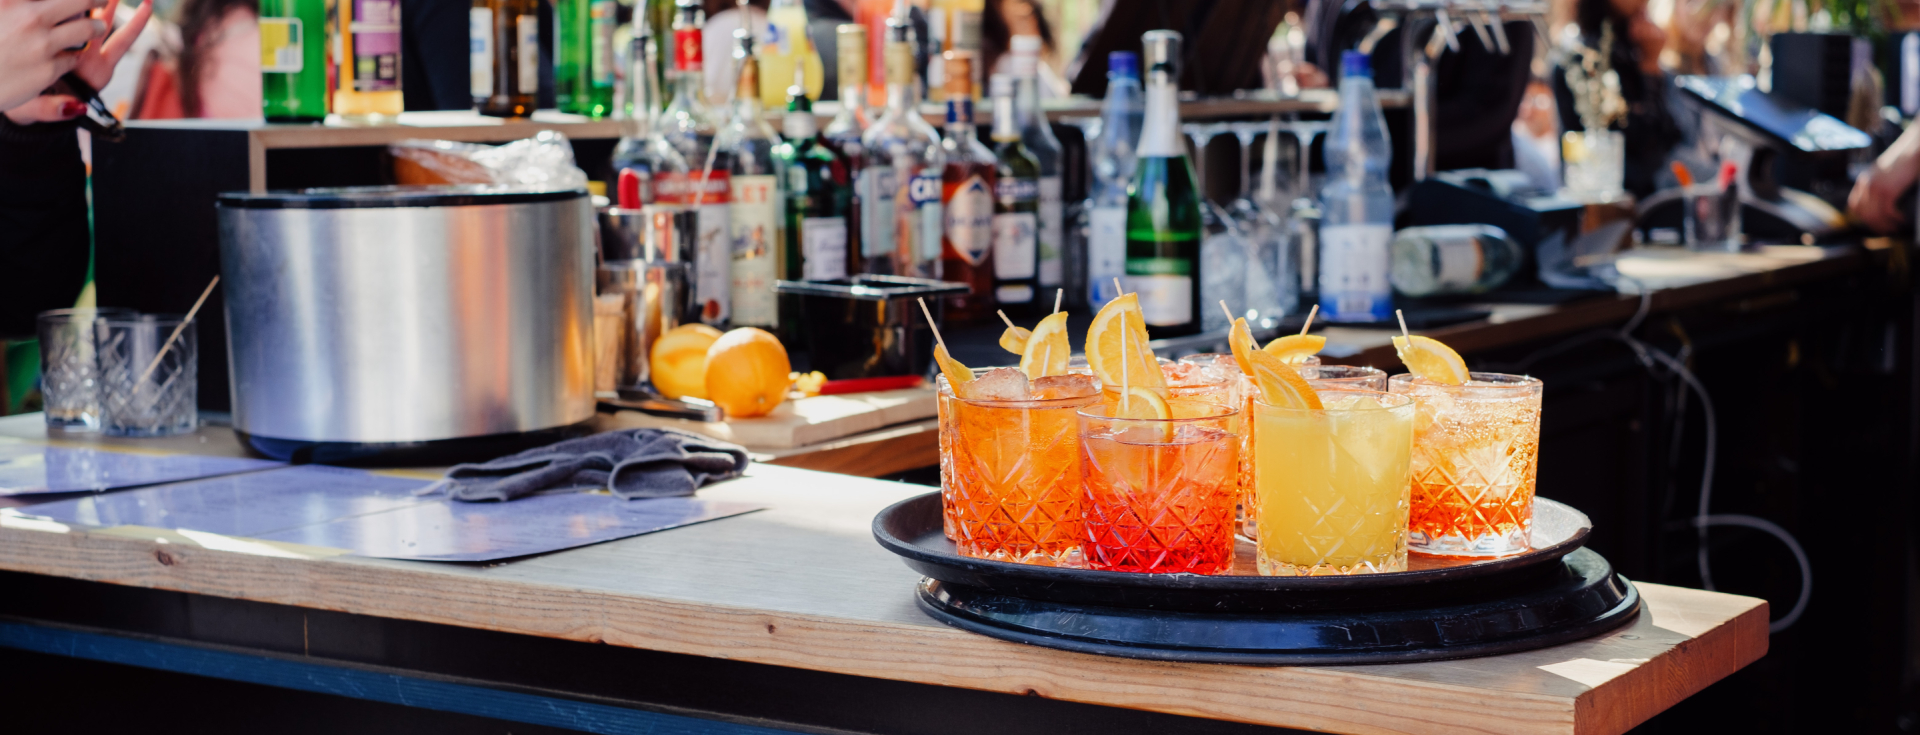 Backbar | Inventory Woes? Here's How to Revamp Your Bar or Restaurant's Processes